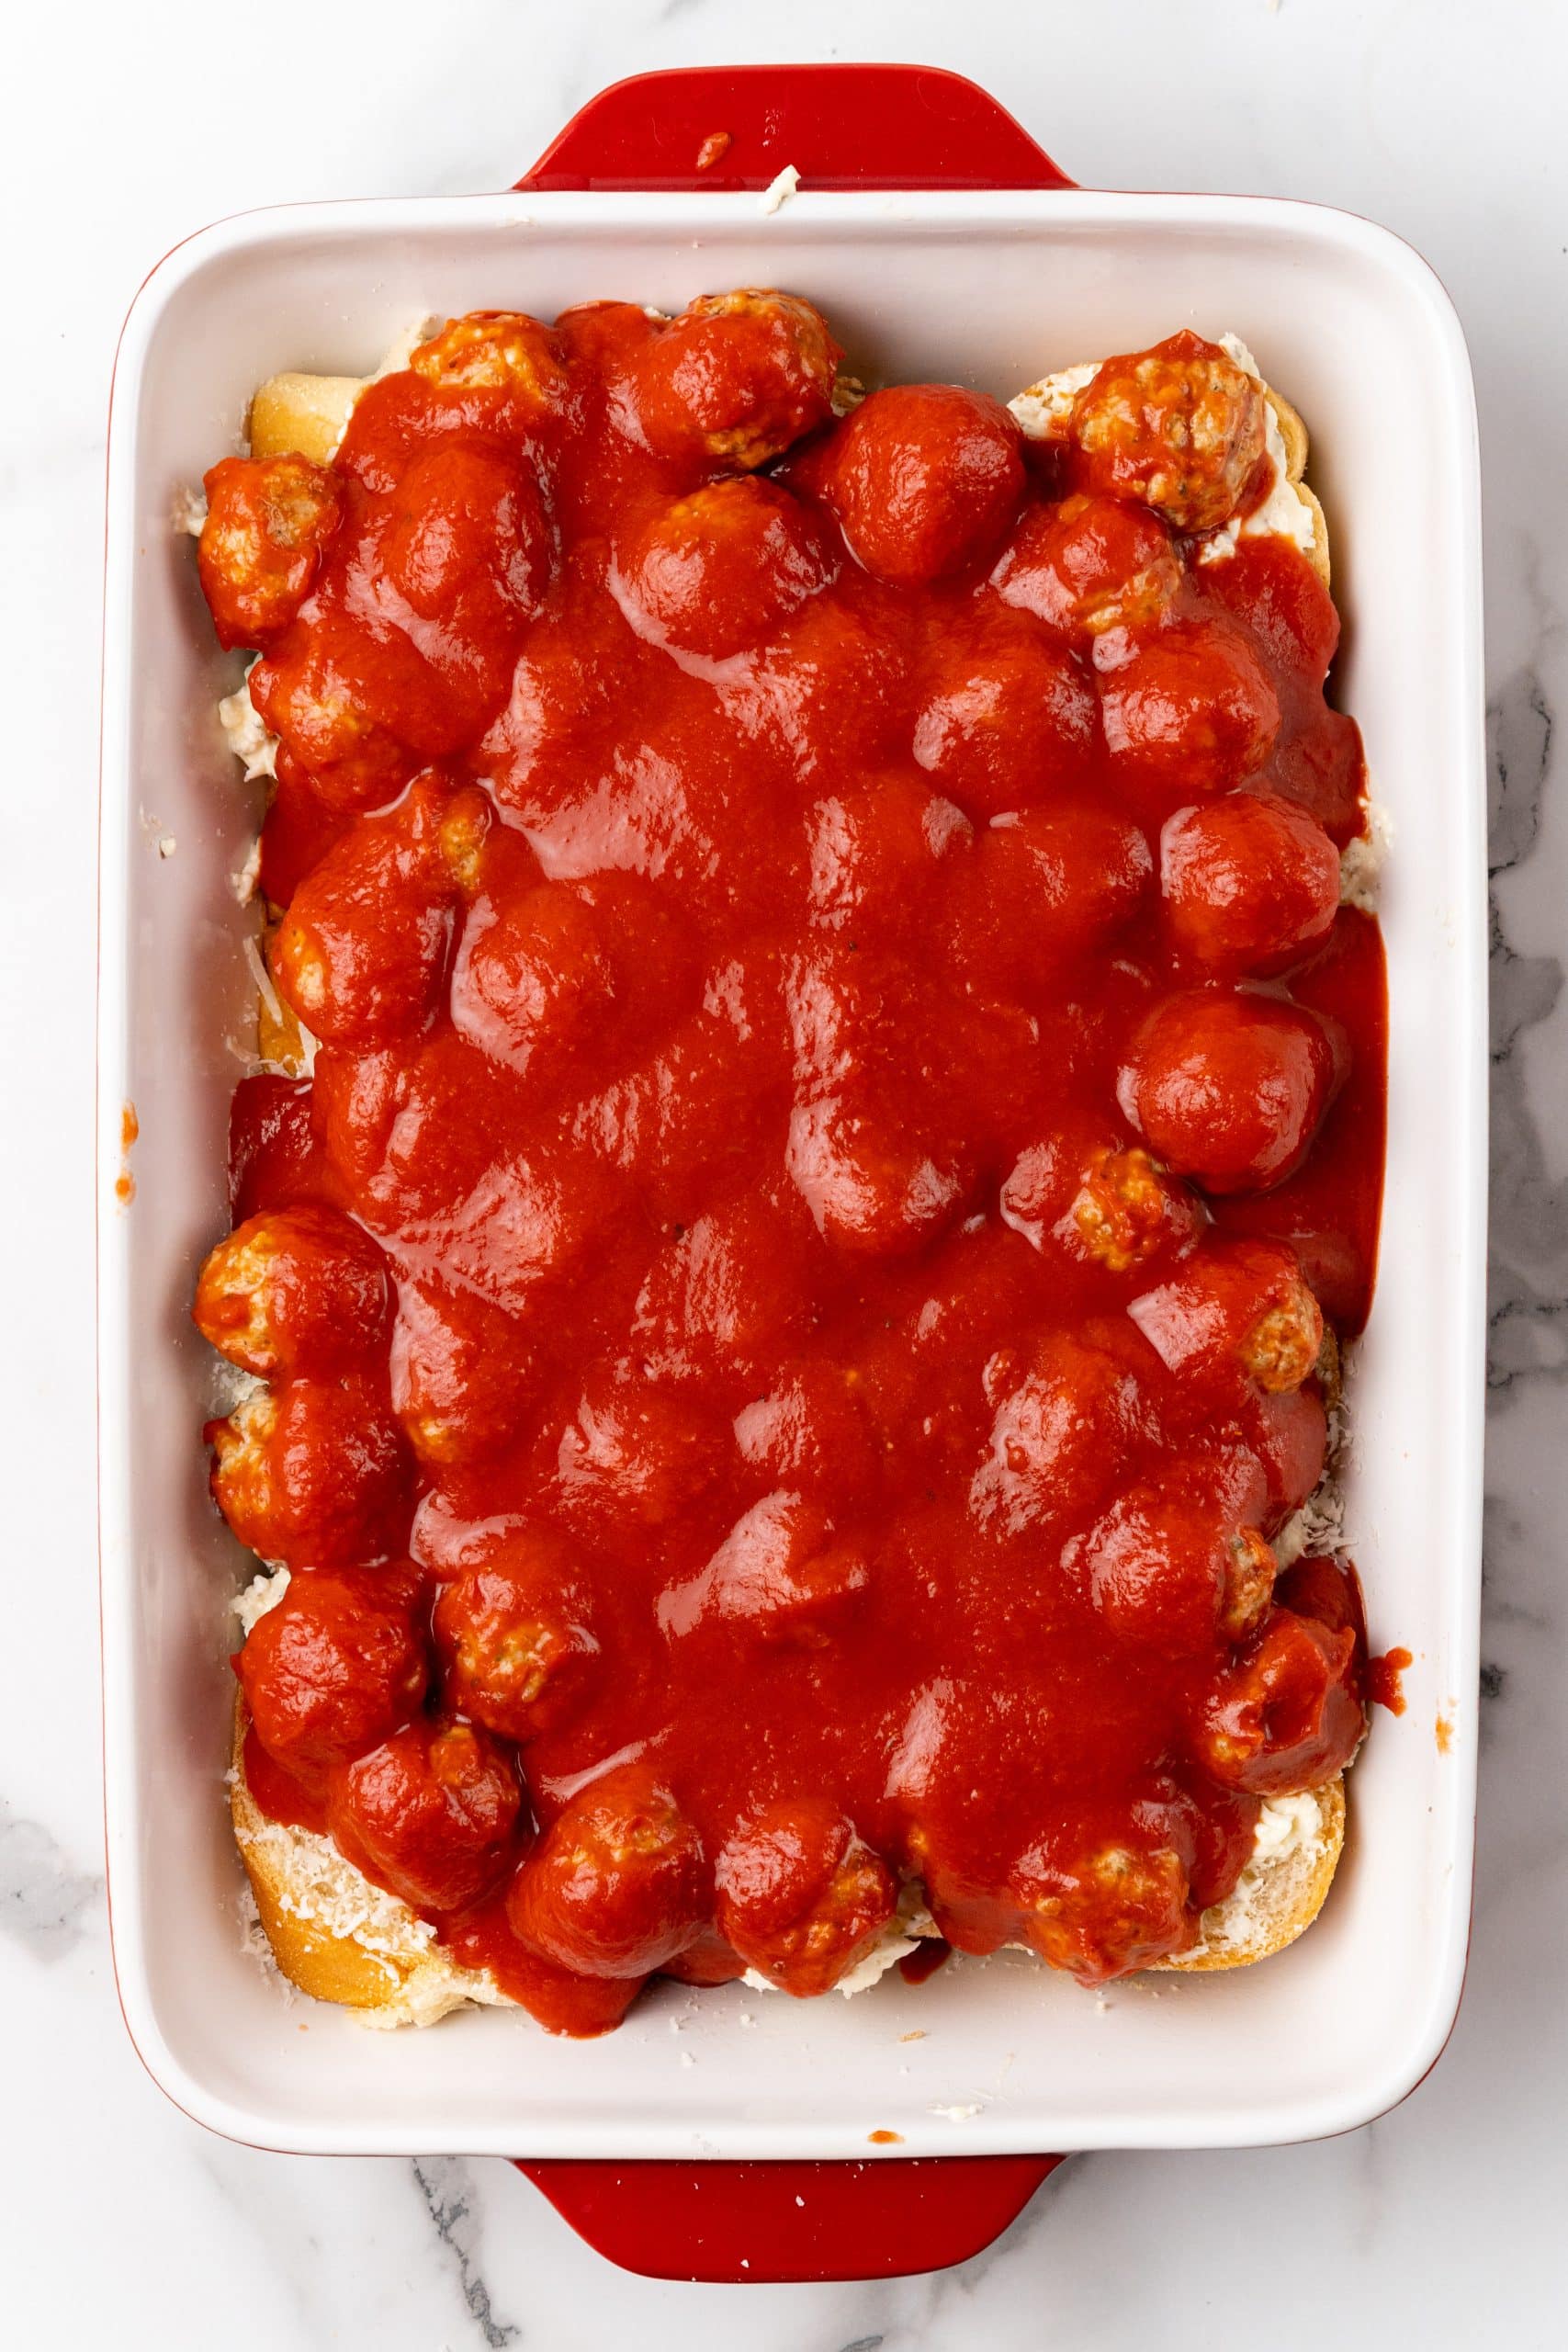 meatballs and sauce spread over slices of bread in a large baking dish